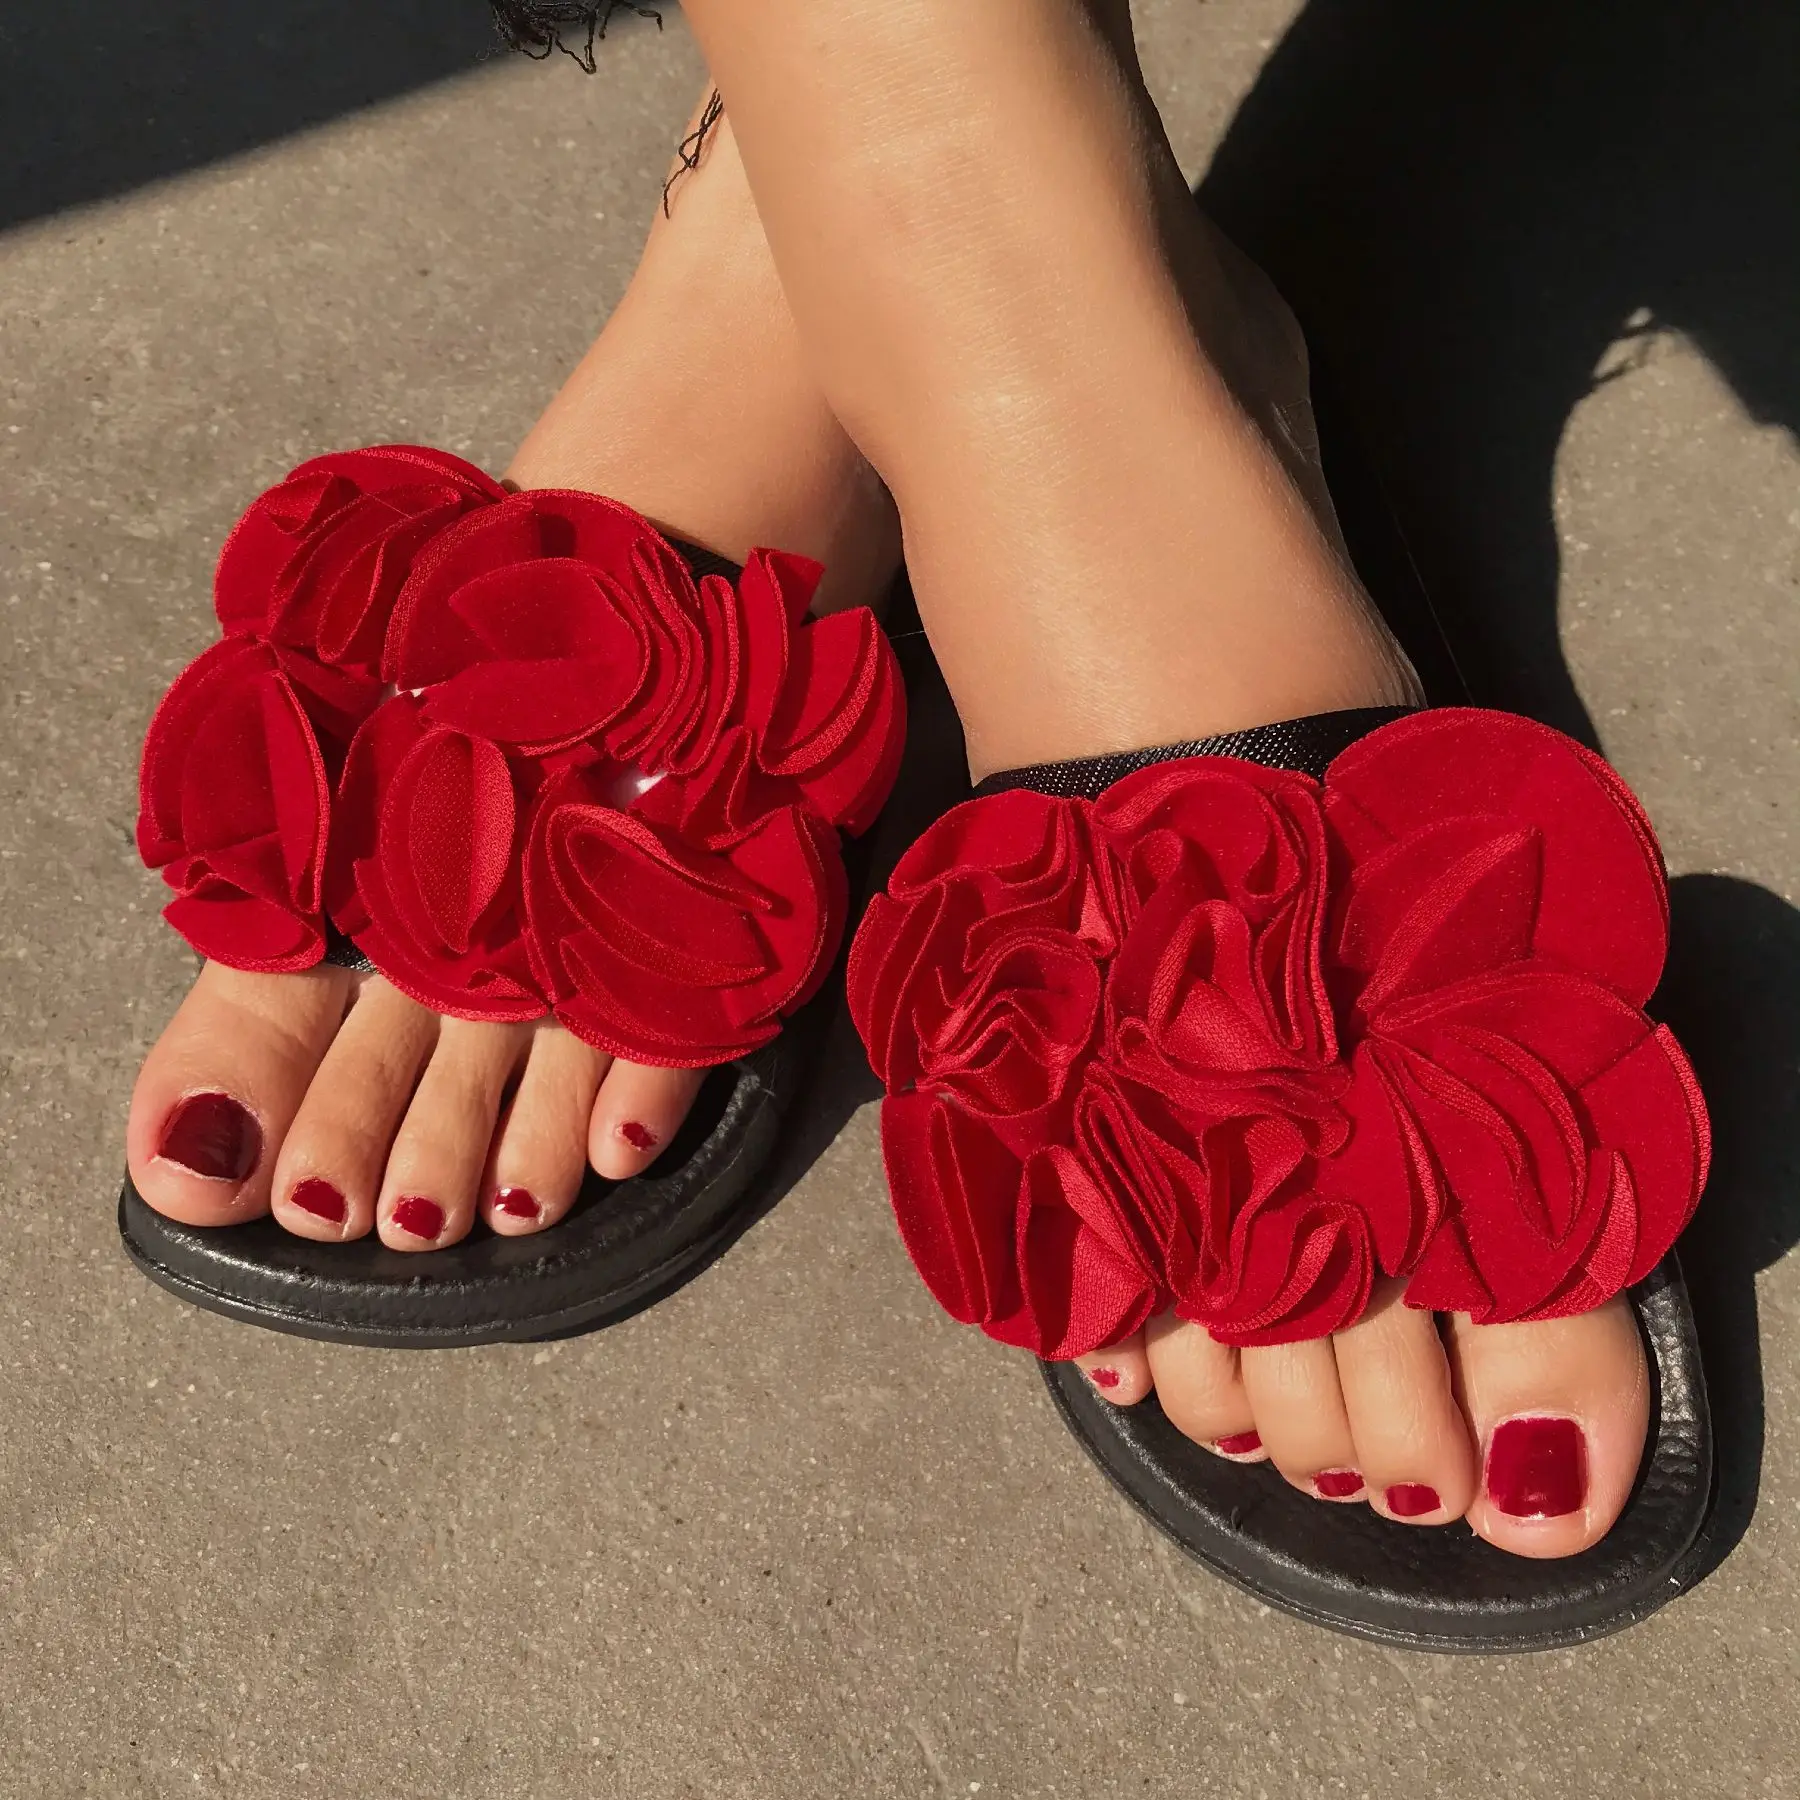 

SD-29 2020 latest fashion flower decorated cross strap open toe slipper sandals for women flat beach sandals summer ladies, Picture show , squine colors